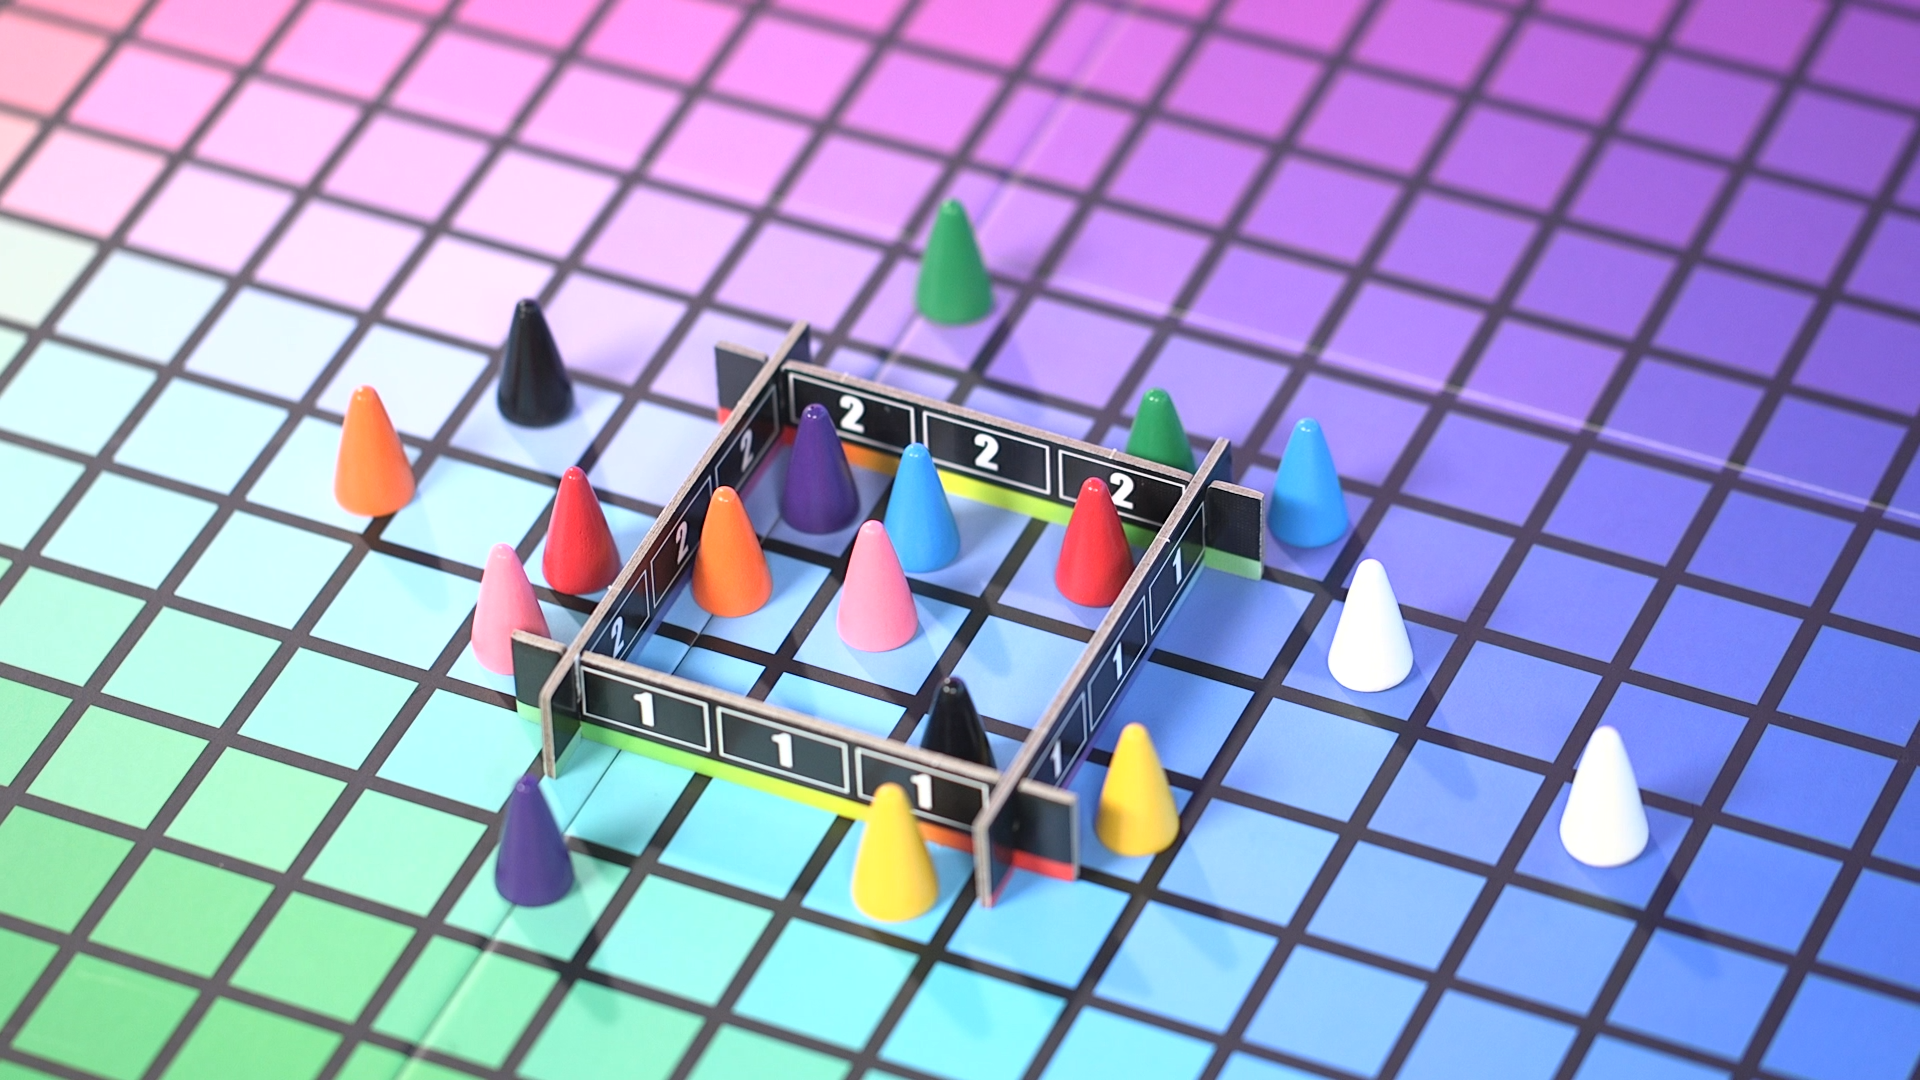 Colorful cone shaped board game pieces sit on grid with a colorful gradient of greens, blues, purples, and pinks. A cardboard square with numbers on it encompasses nine squares on the grid, with some cones inside it and some outside.